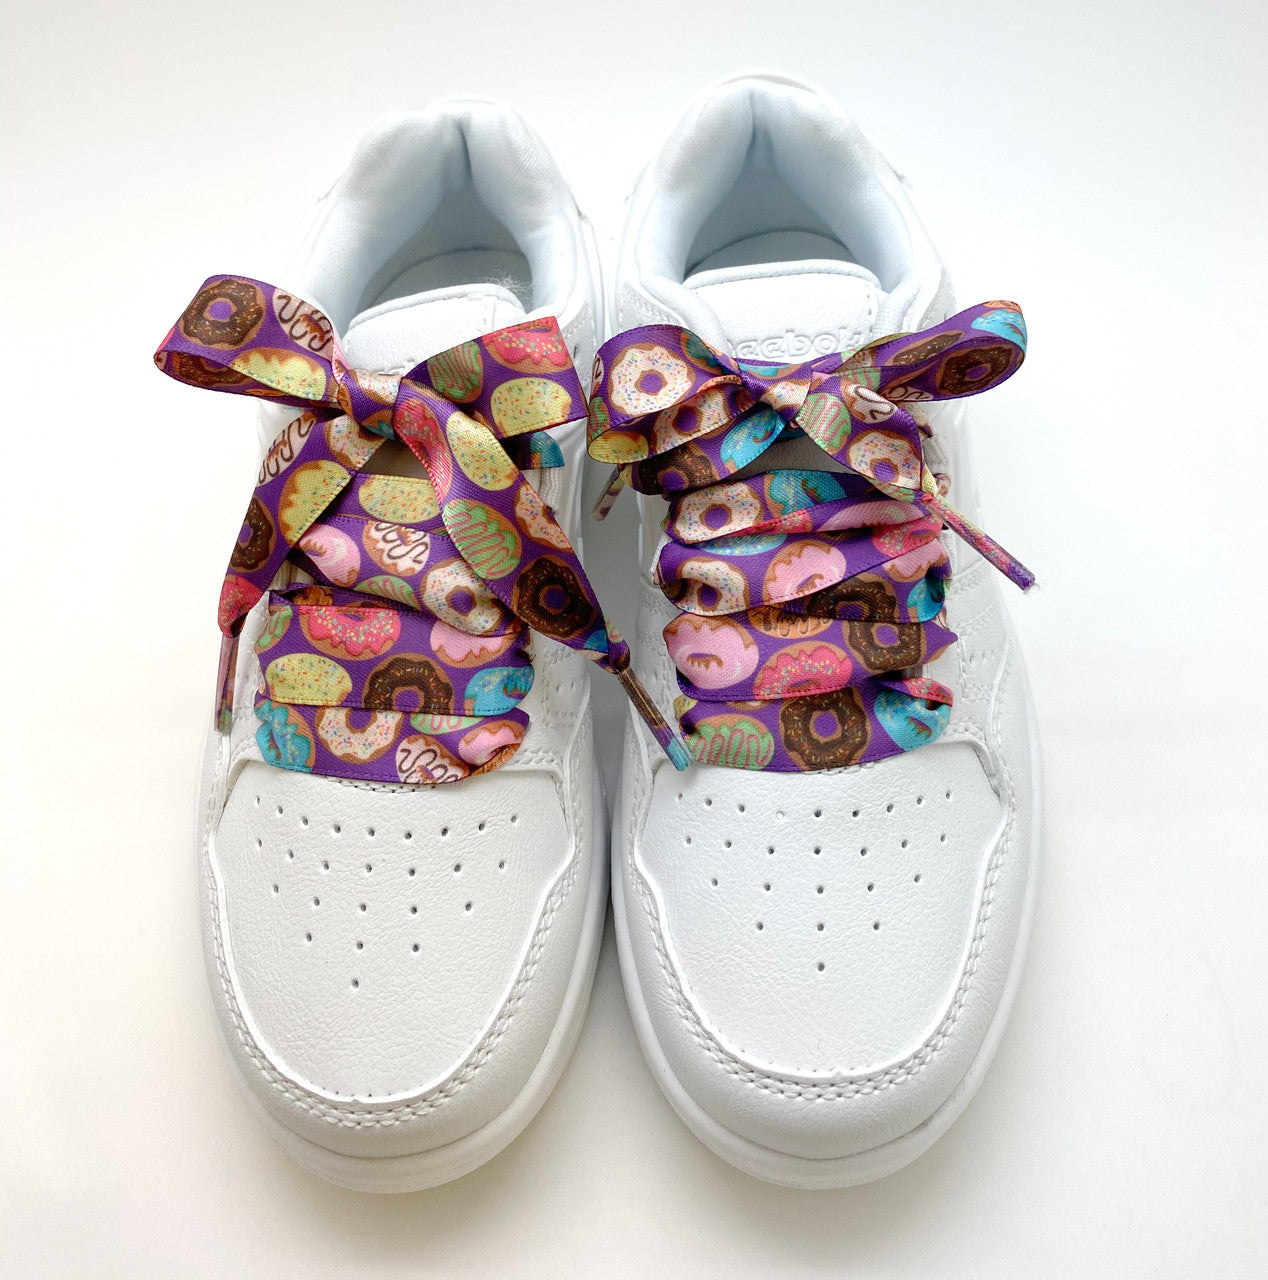 Satin shoelaces donut design is perfect for adding some fun and fashion to your sneakers! This is a great shoelace for fun dance shoes, wedding shoes, cheerleading and recitals! All our ribbon shoelaces are printed using dye sublimation technology and can be washed, ironed and re-used! All our laces are designed and printed in the USA